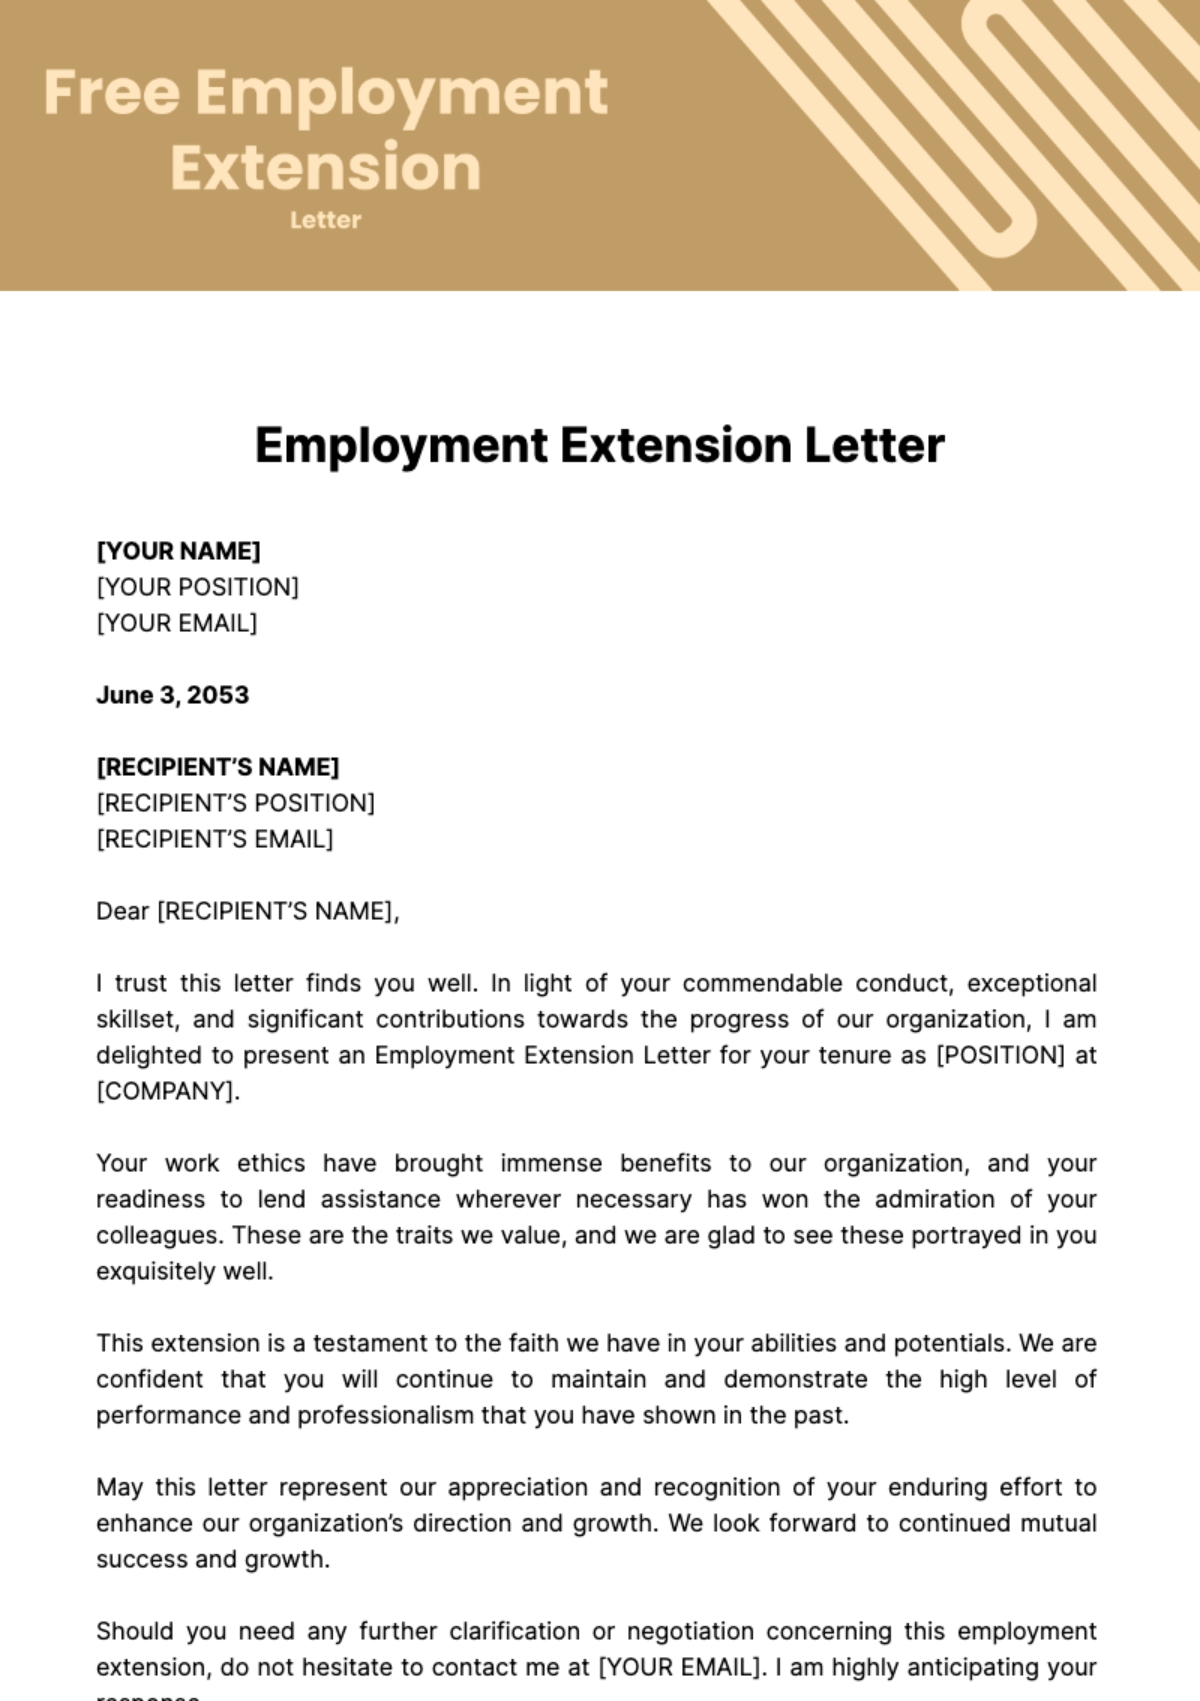 Employment Extension Letter Template